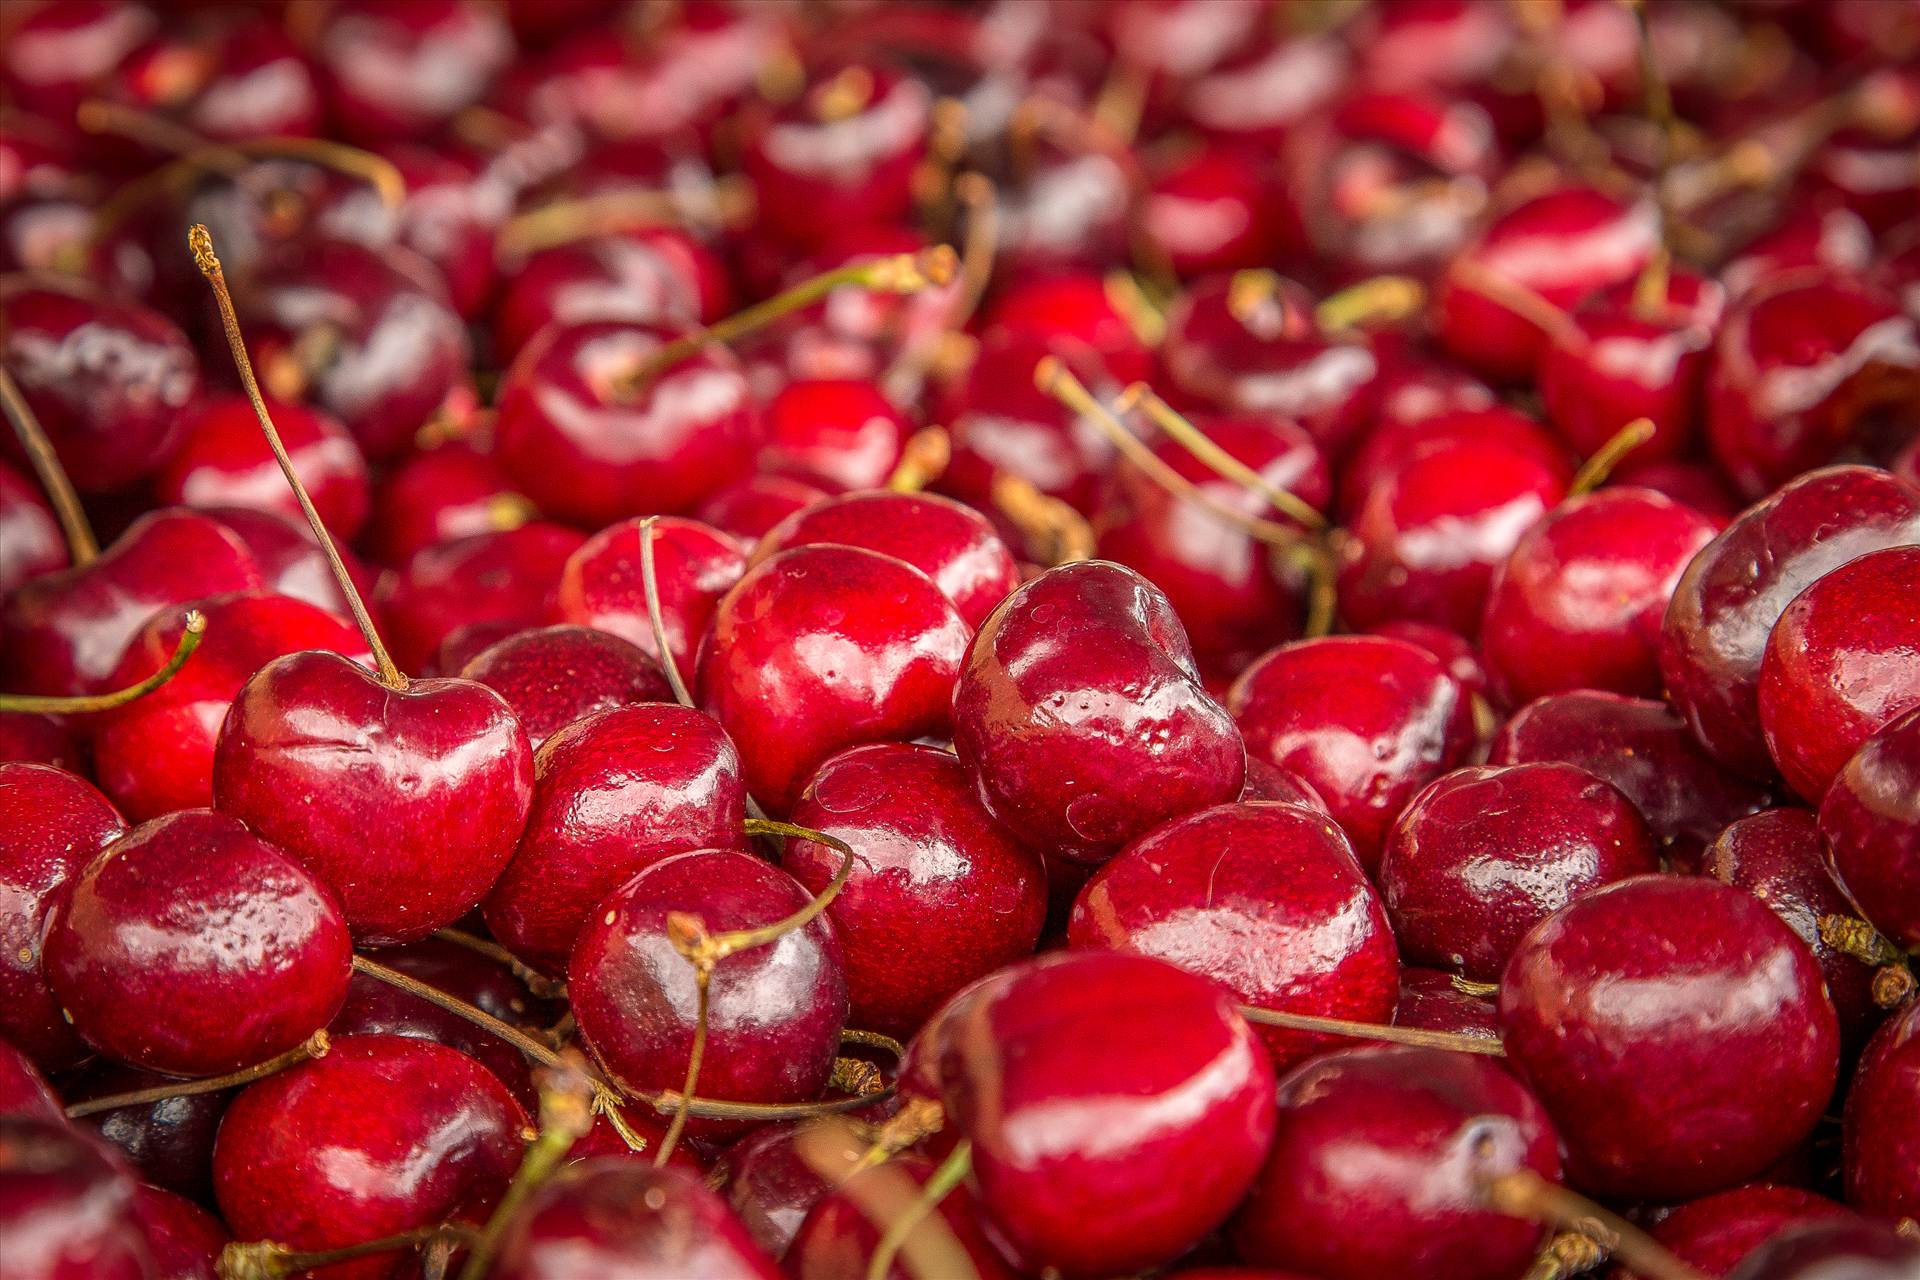 Millions of Cherries - Cherries for me. by Scott Smith Photos